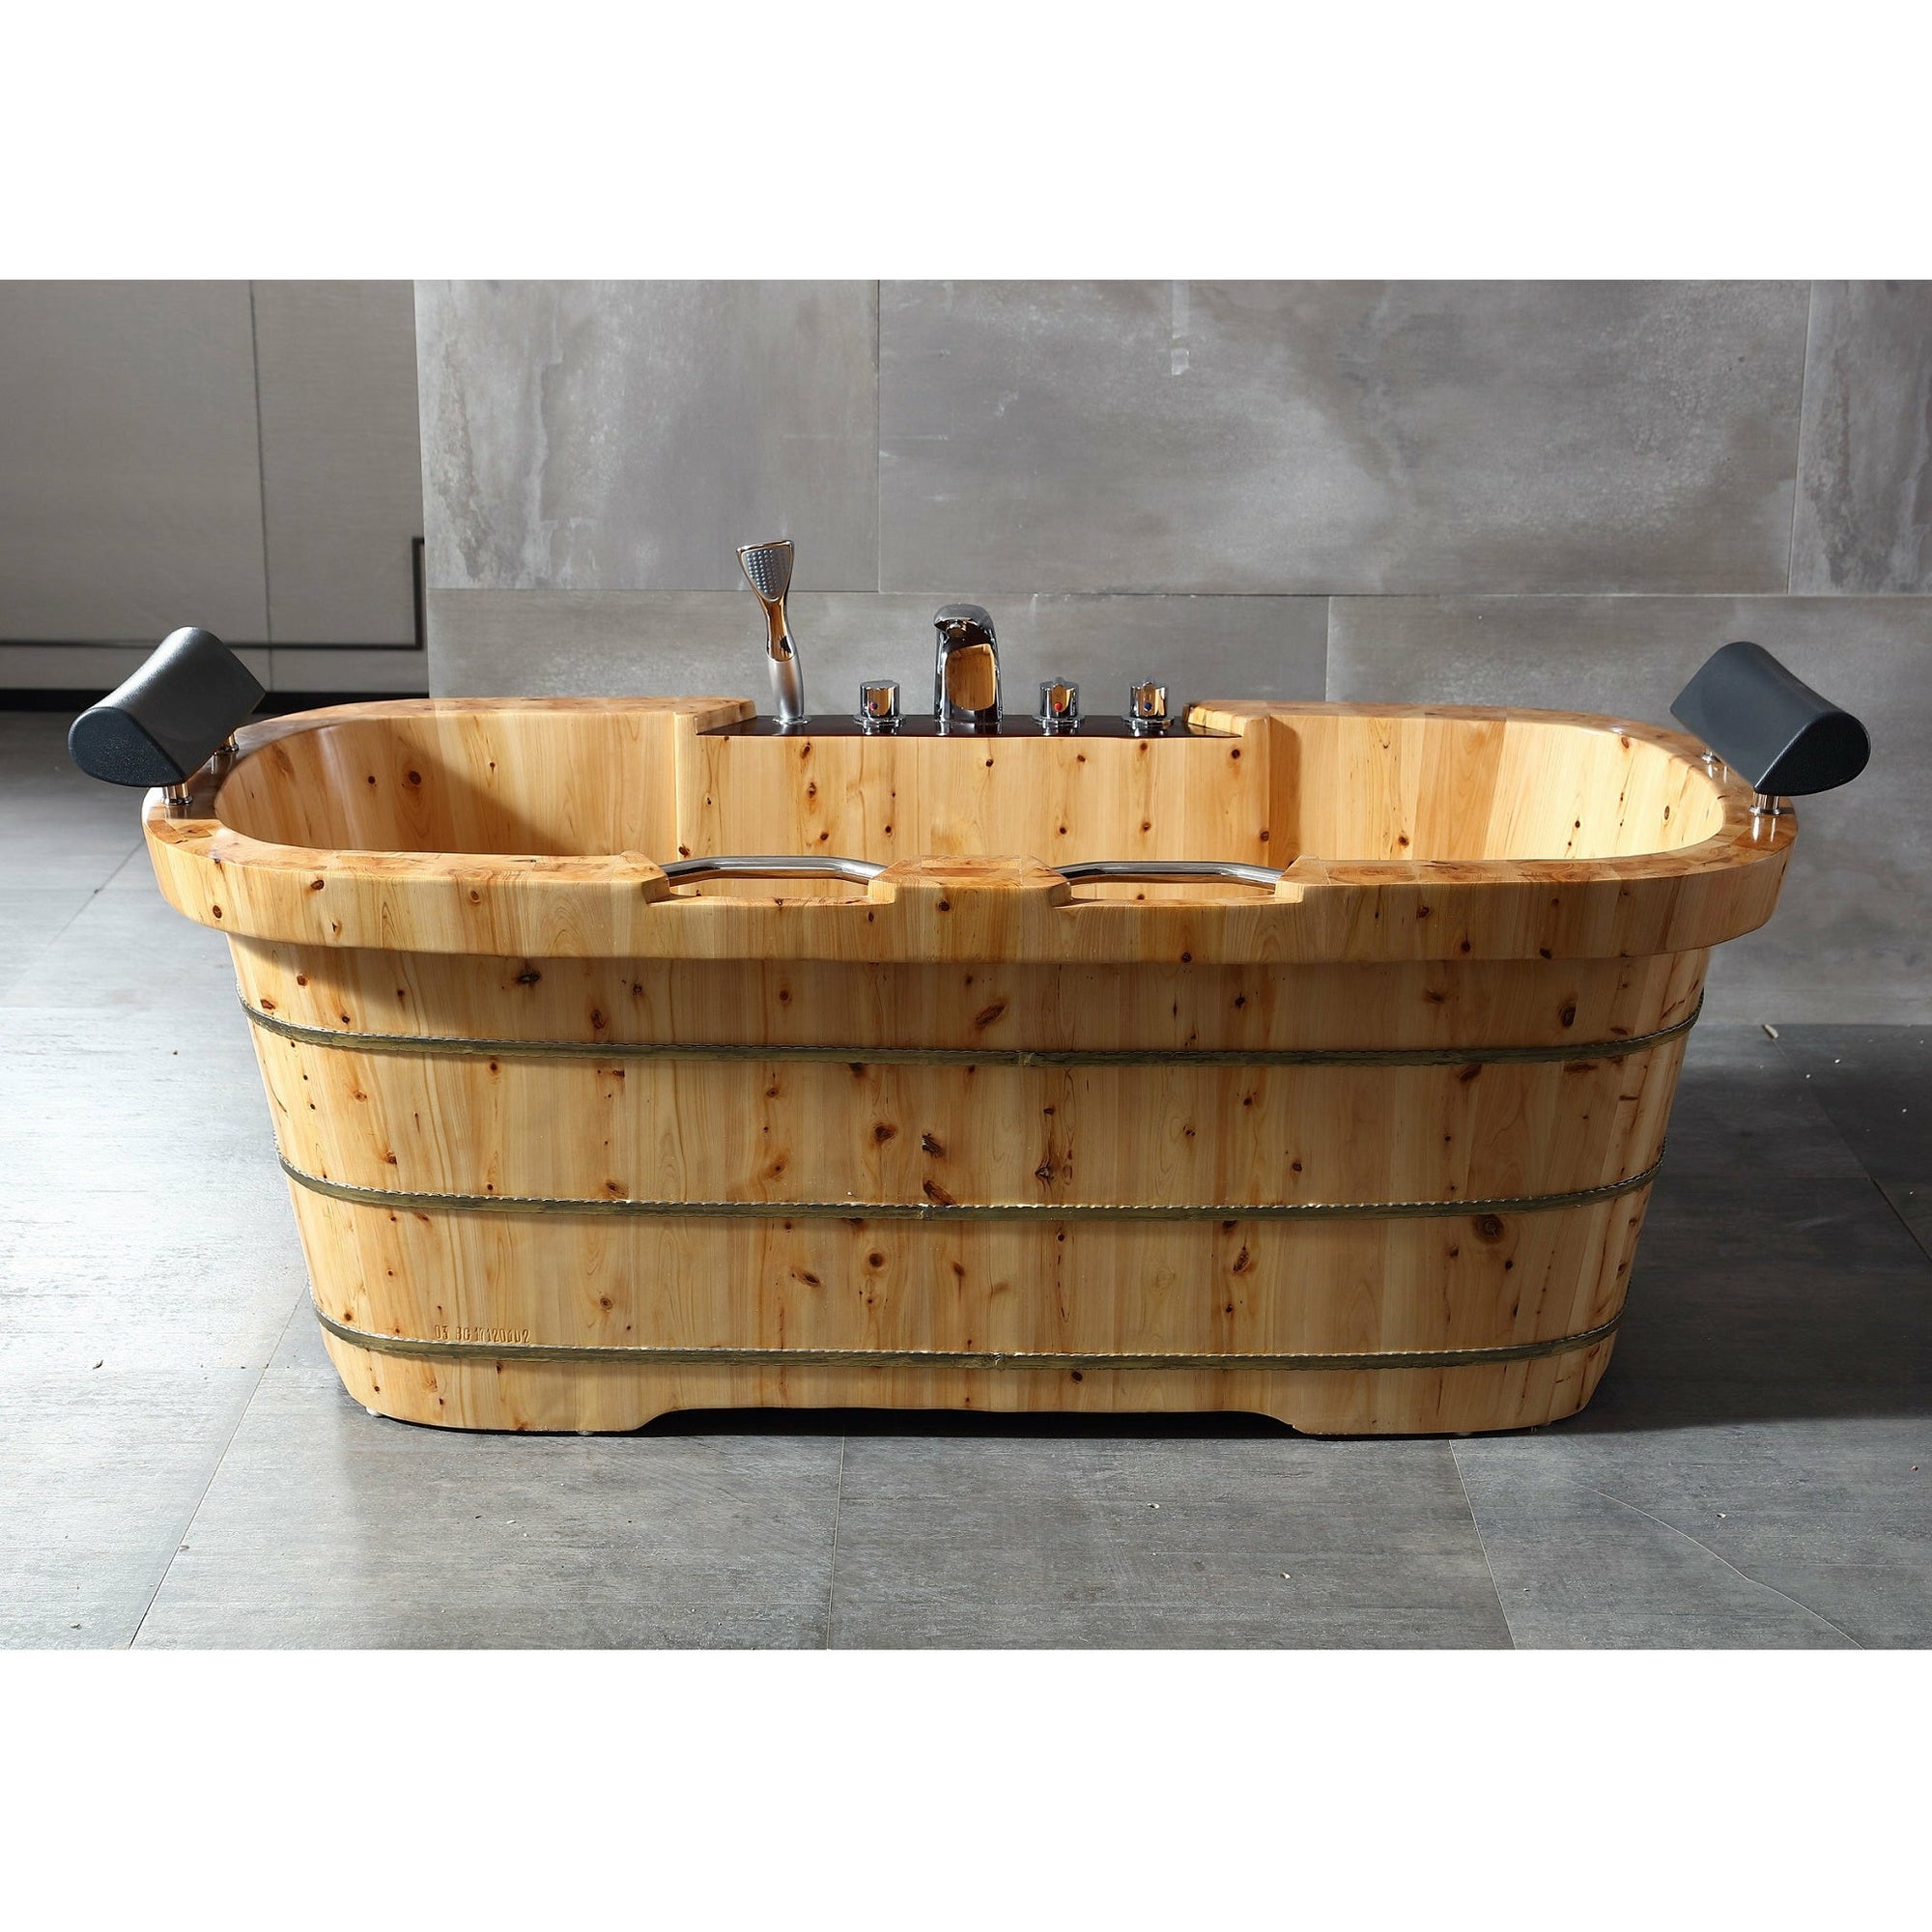 ALFI AB1130 65" 2 Person Free Standing Cedar Wooden Bathtub with Fixtures & Headrests - three electroplated iron wraps with with black and gold paint with Tub Filler, Hand Held Shower Head - 2 person capacity in a white background